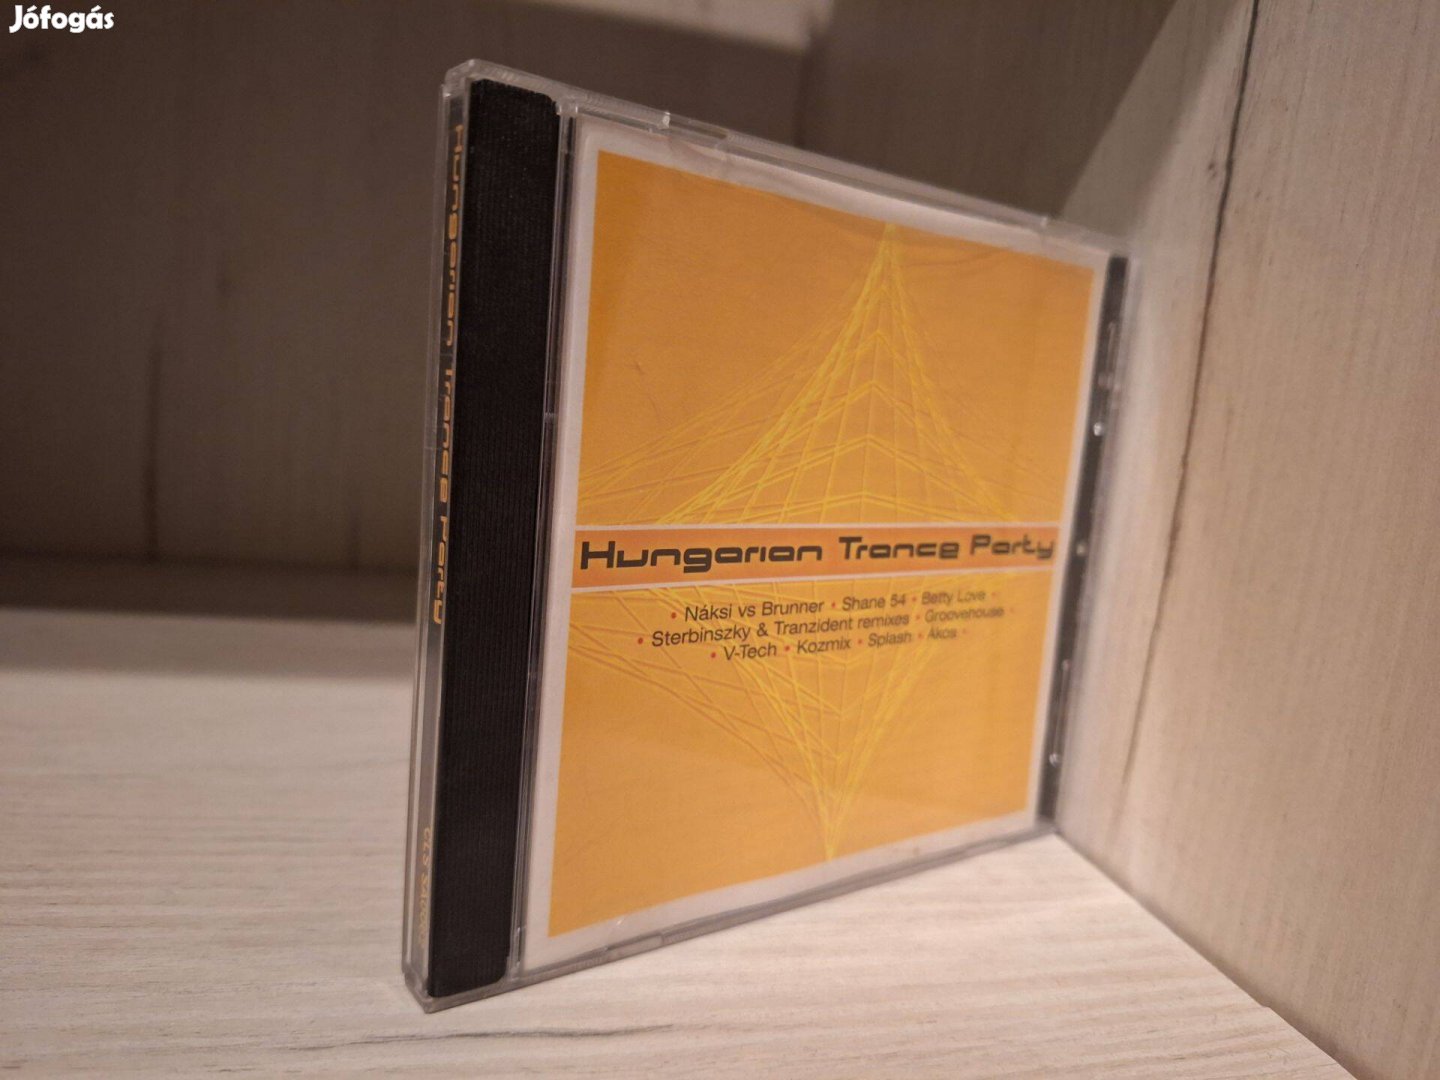 Hungarian Trance Party - CD